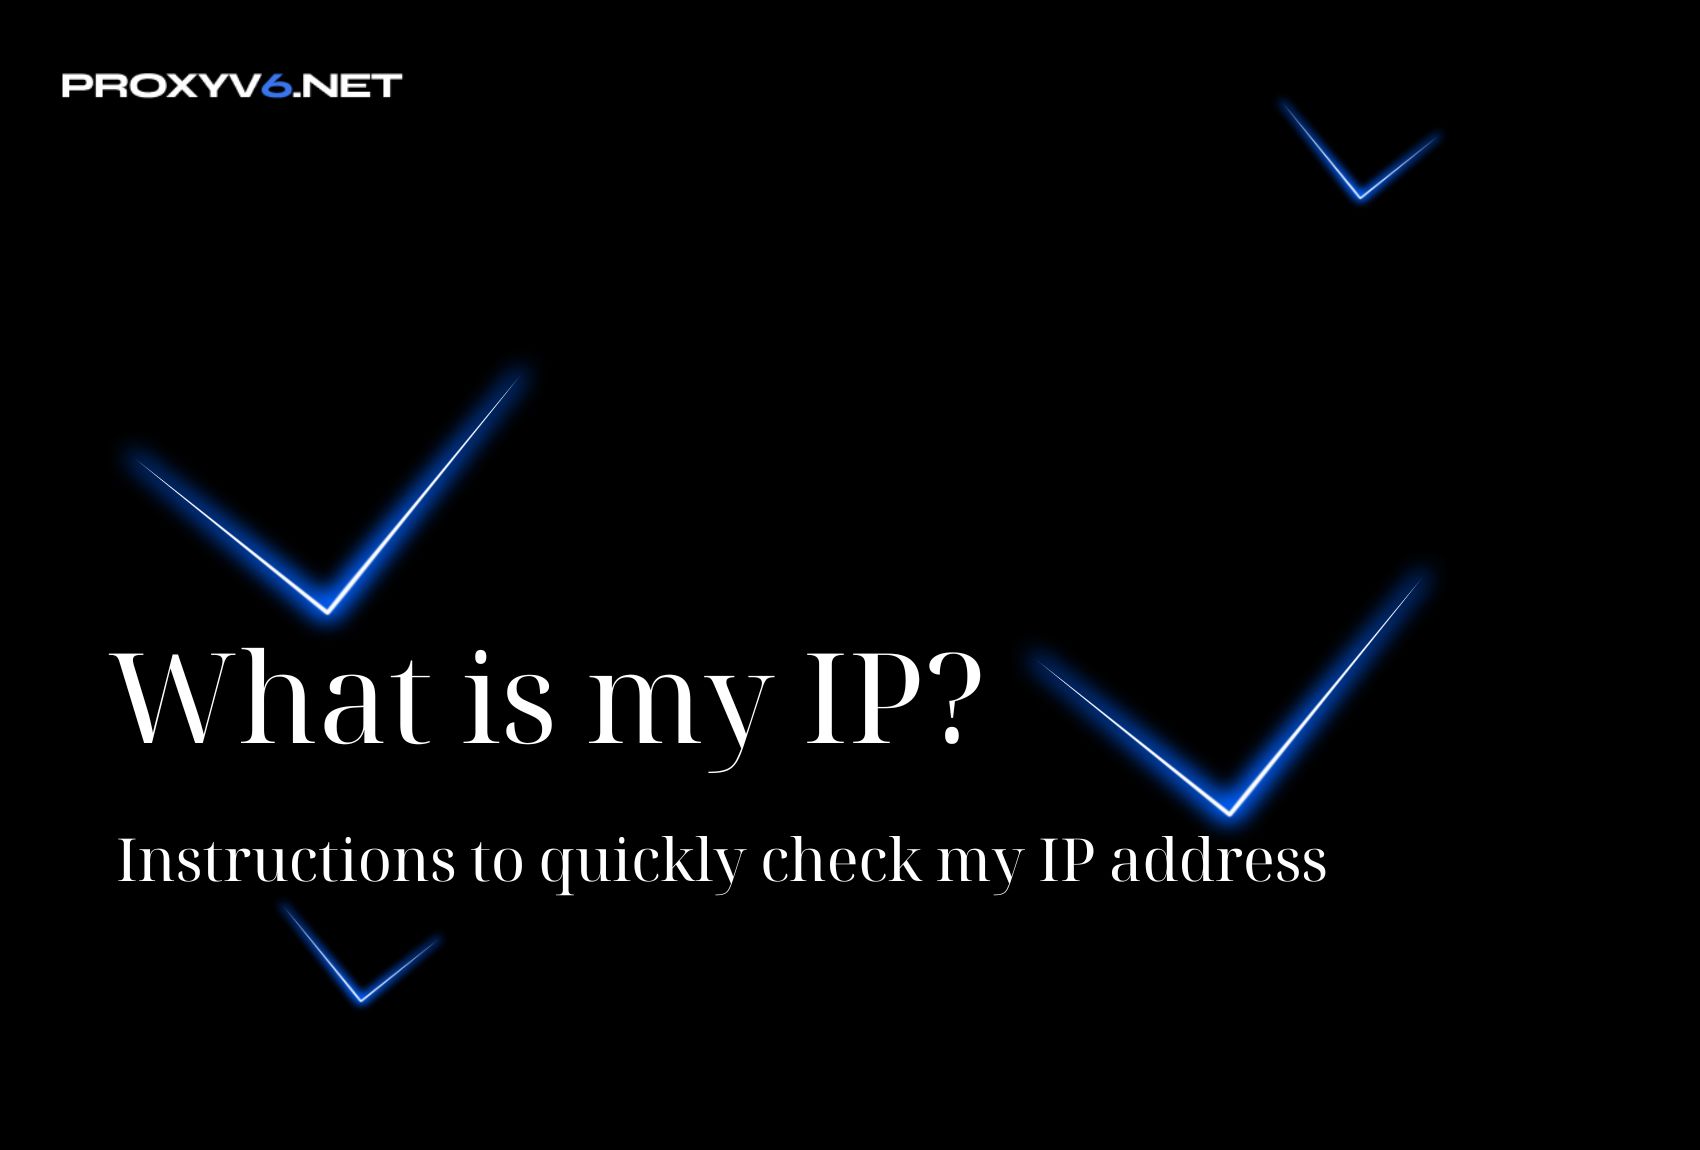 What is my IP? Instructions to quickly check my IP address